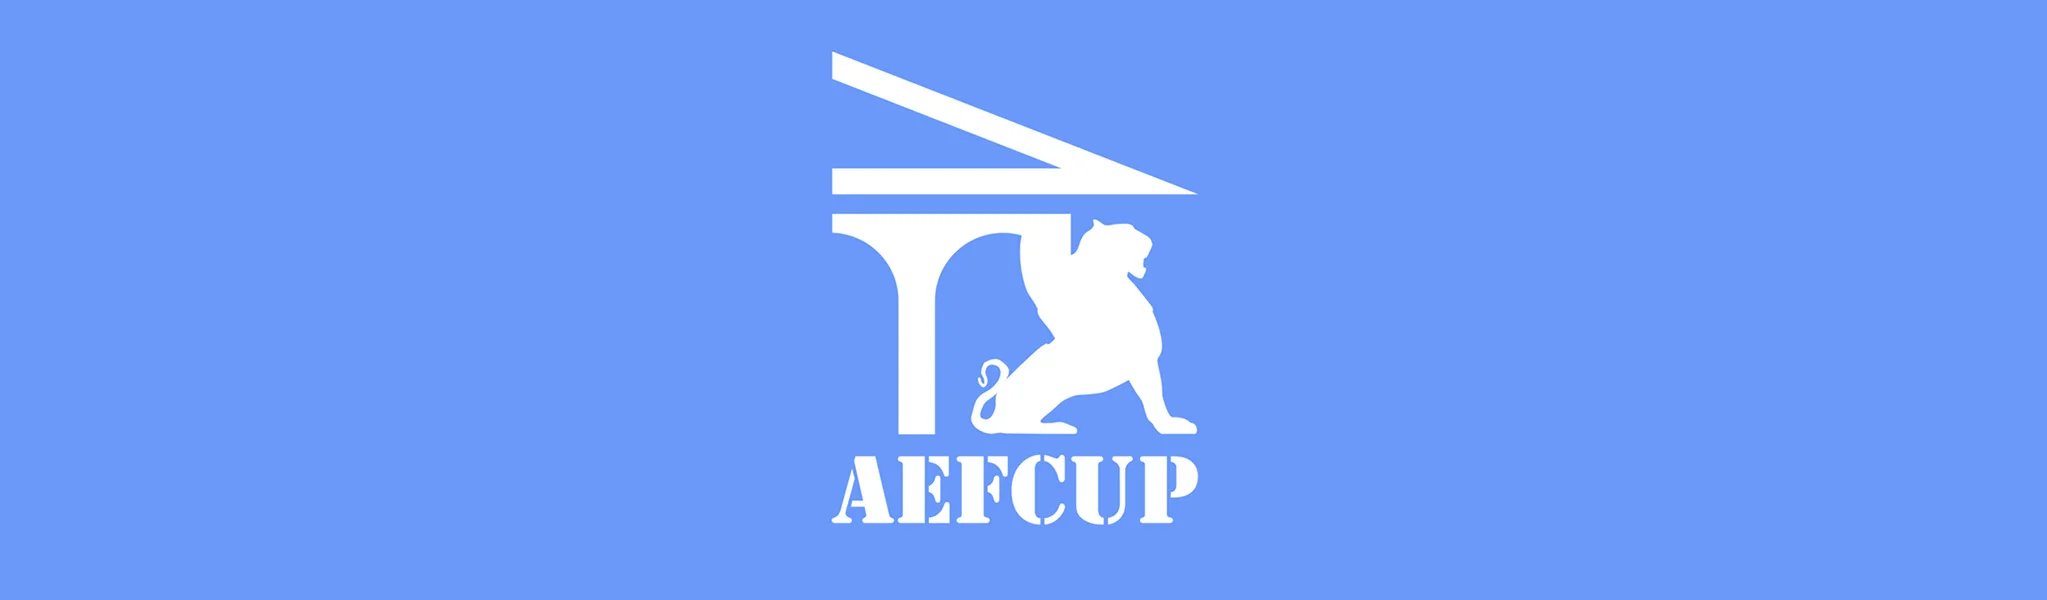 AEFCUP logo - Students' Association of the Faculty of Sciences of the University of Porto